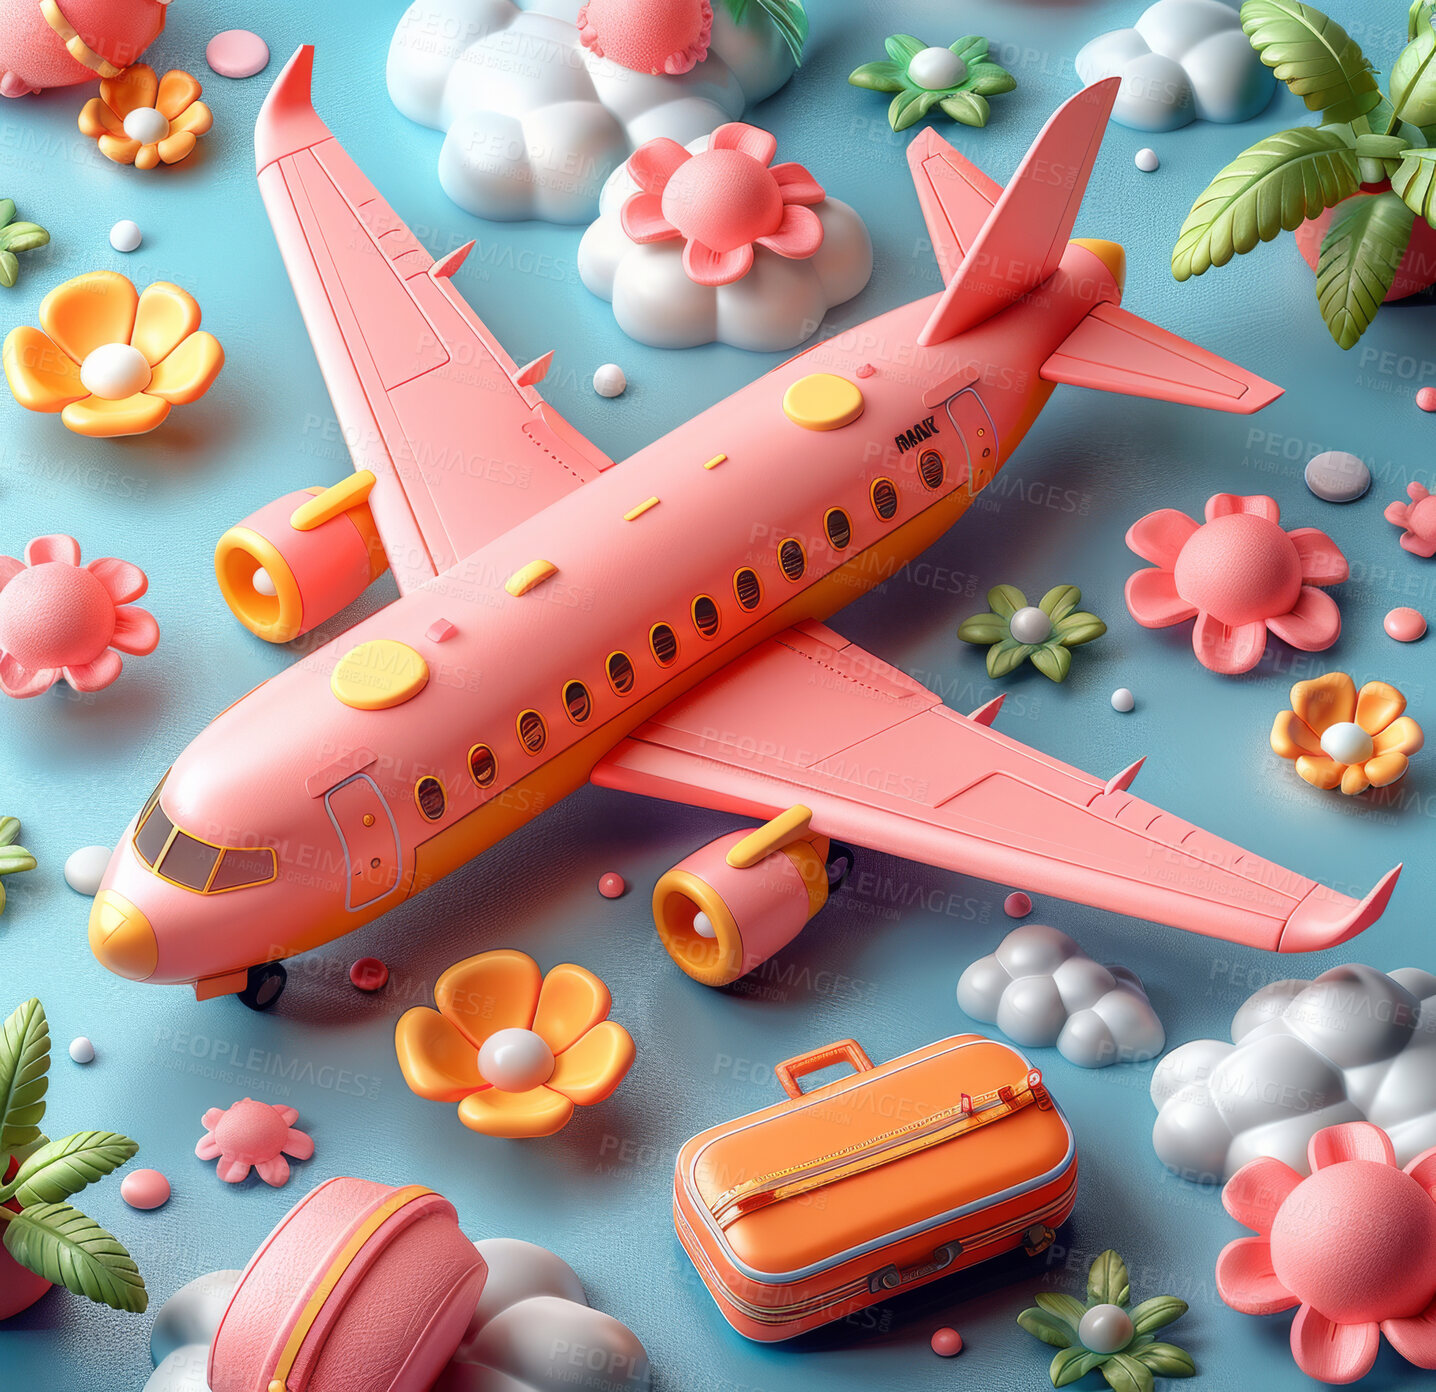 Buy stock photo Cartoon, 3D and illustrations for travel, vacation or holiday on backdrop. Global map, plane and landscapes for tourism, concept or adventure. Luggage, transportation and playful pastel colours